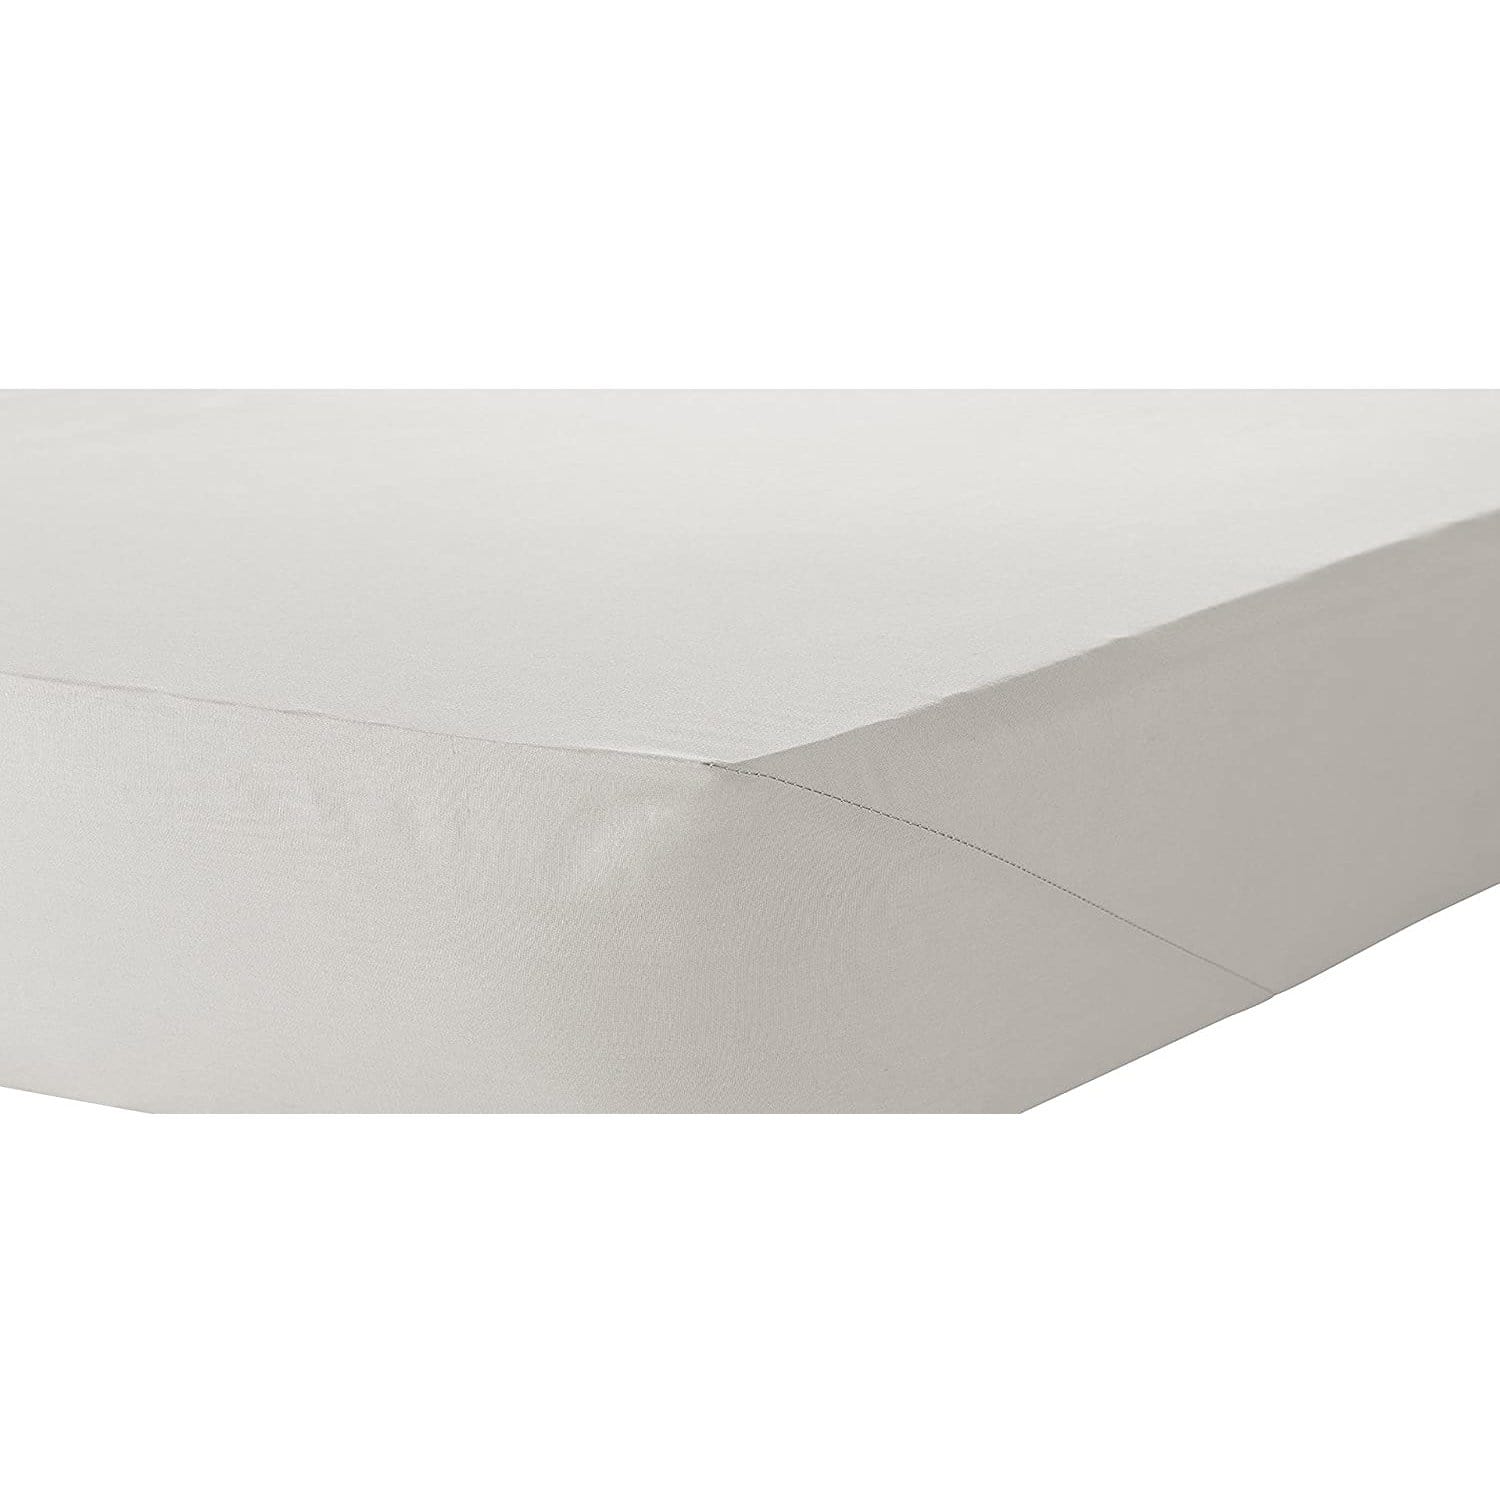 Percale Fitted Sheet SINGLE / CREAM OLIVIA ROCCO Fitted Sheet